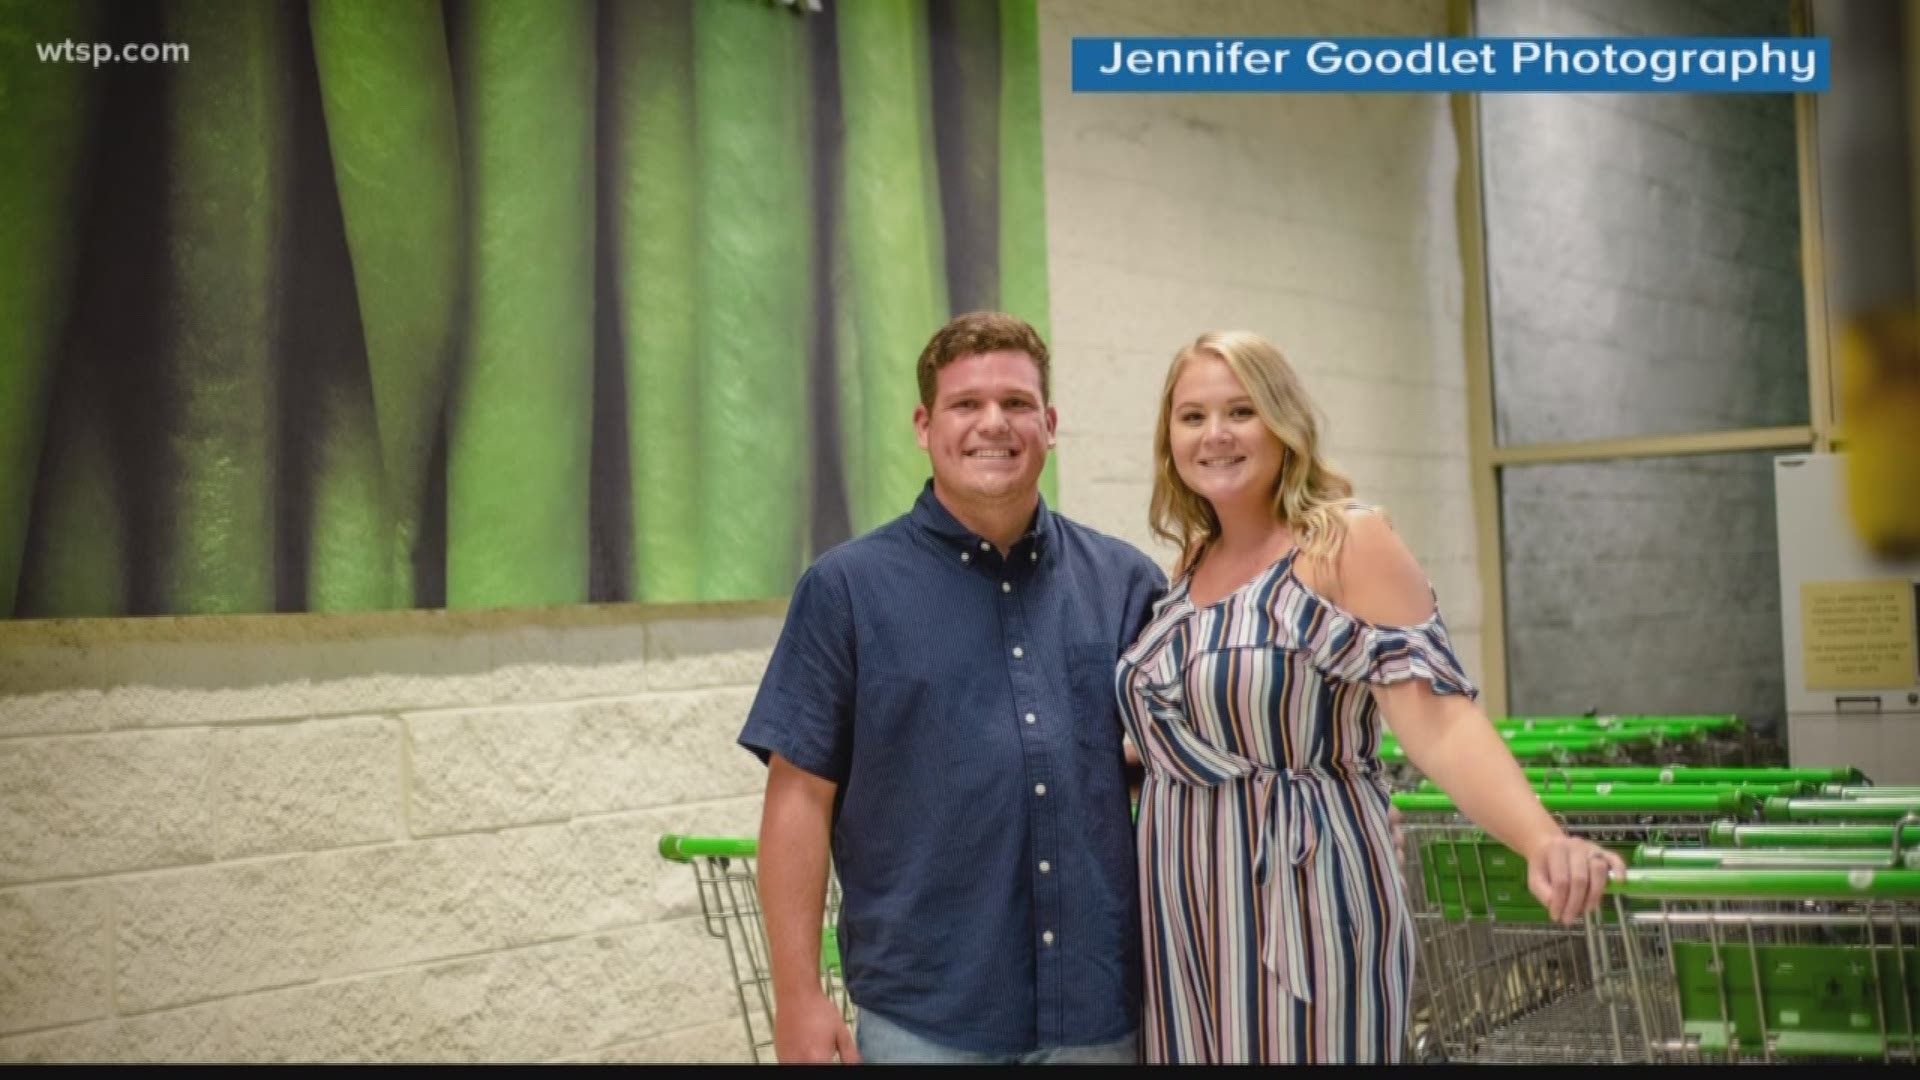 Publix, where shopping and falling in love is a pleasure.

That’s why the Publix store where Alexandra Darch and Dylan Smith first met was the perfect place to have their engagement photos done.

https://on.wtsp.com/2OK4ihE